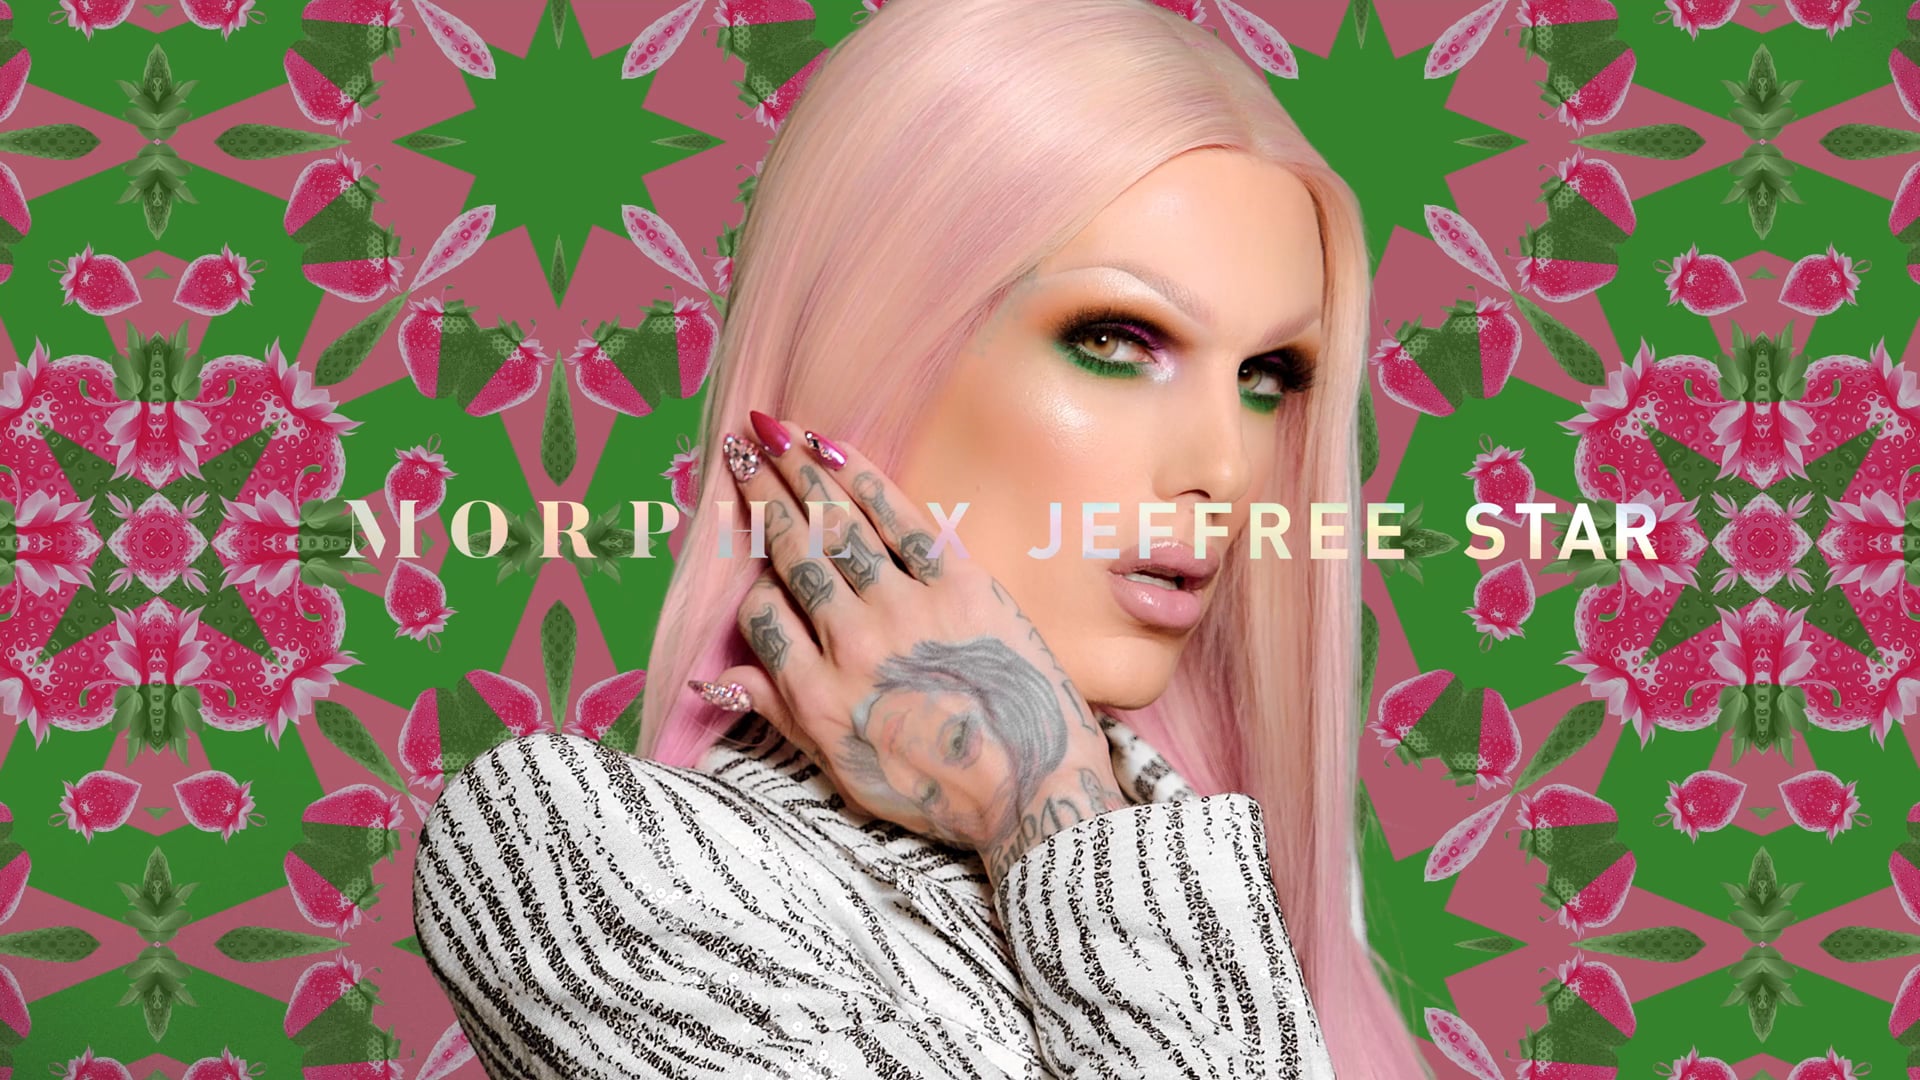 Jeffree Star x Morphe Brushes Cosmetics Ad Campaign